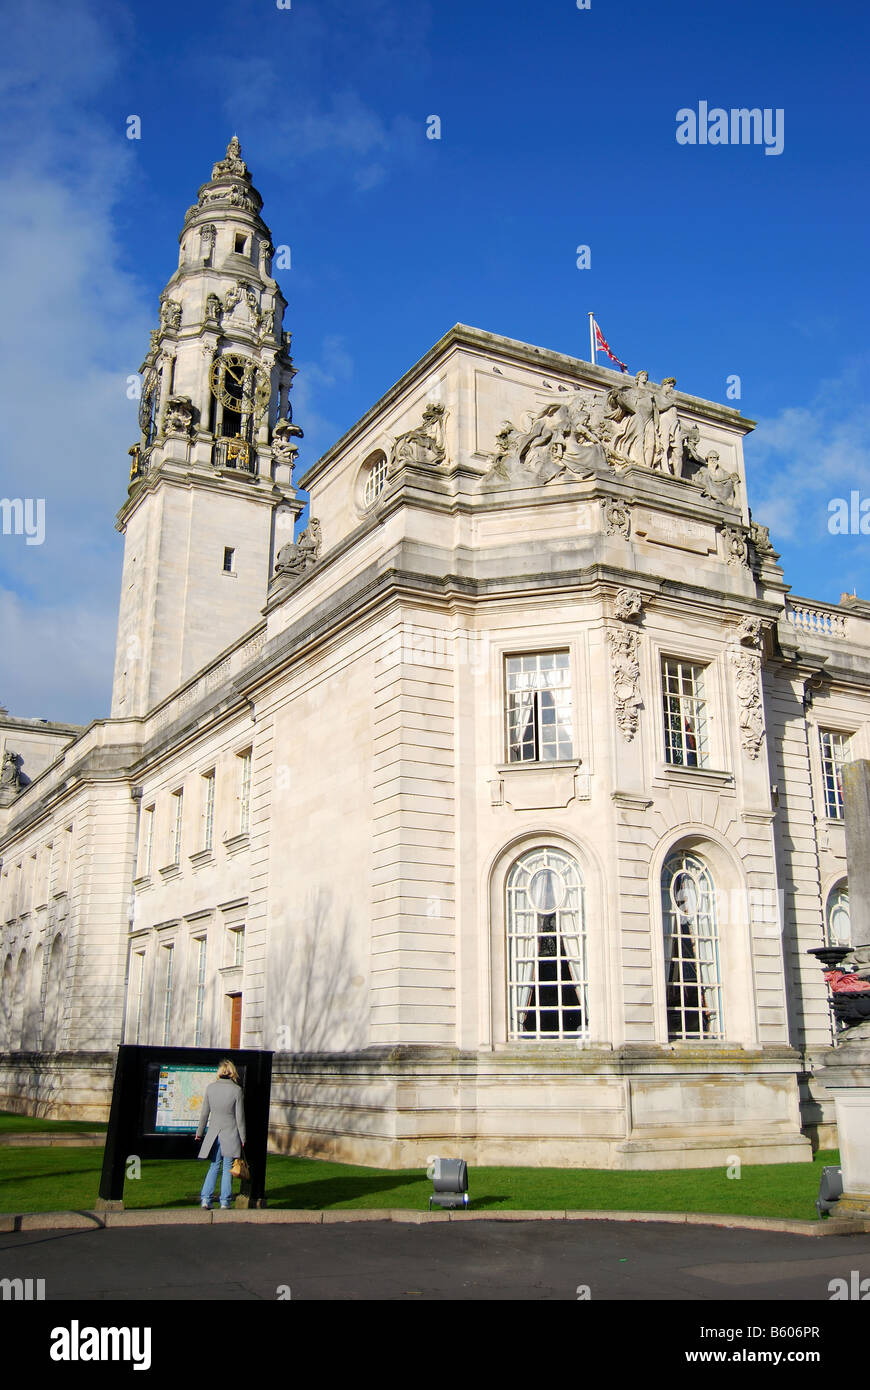 City Hall showing Clock Tower, Cathays Park, Cardiff, Wales, United Kingdom Stock Photo